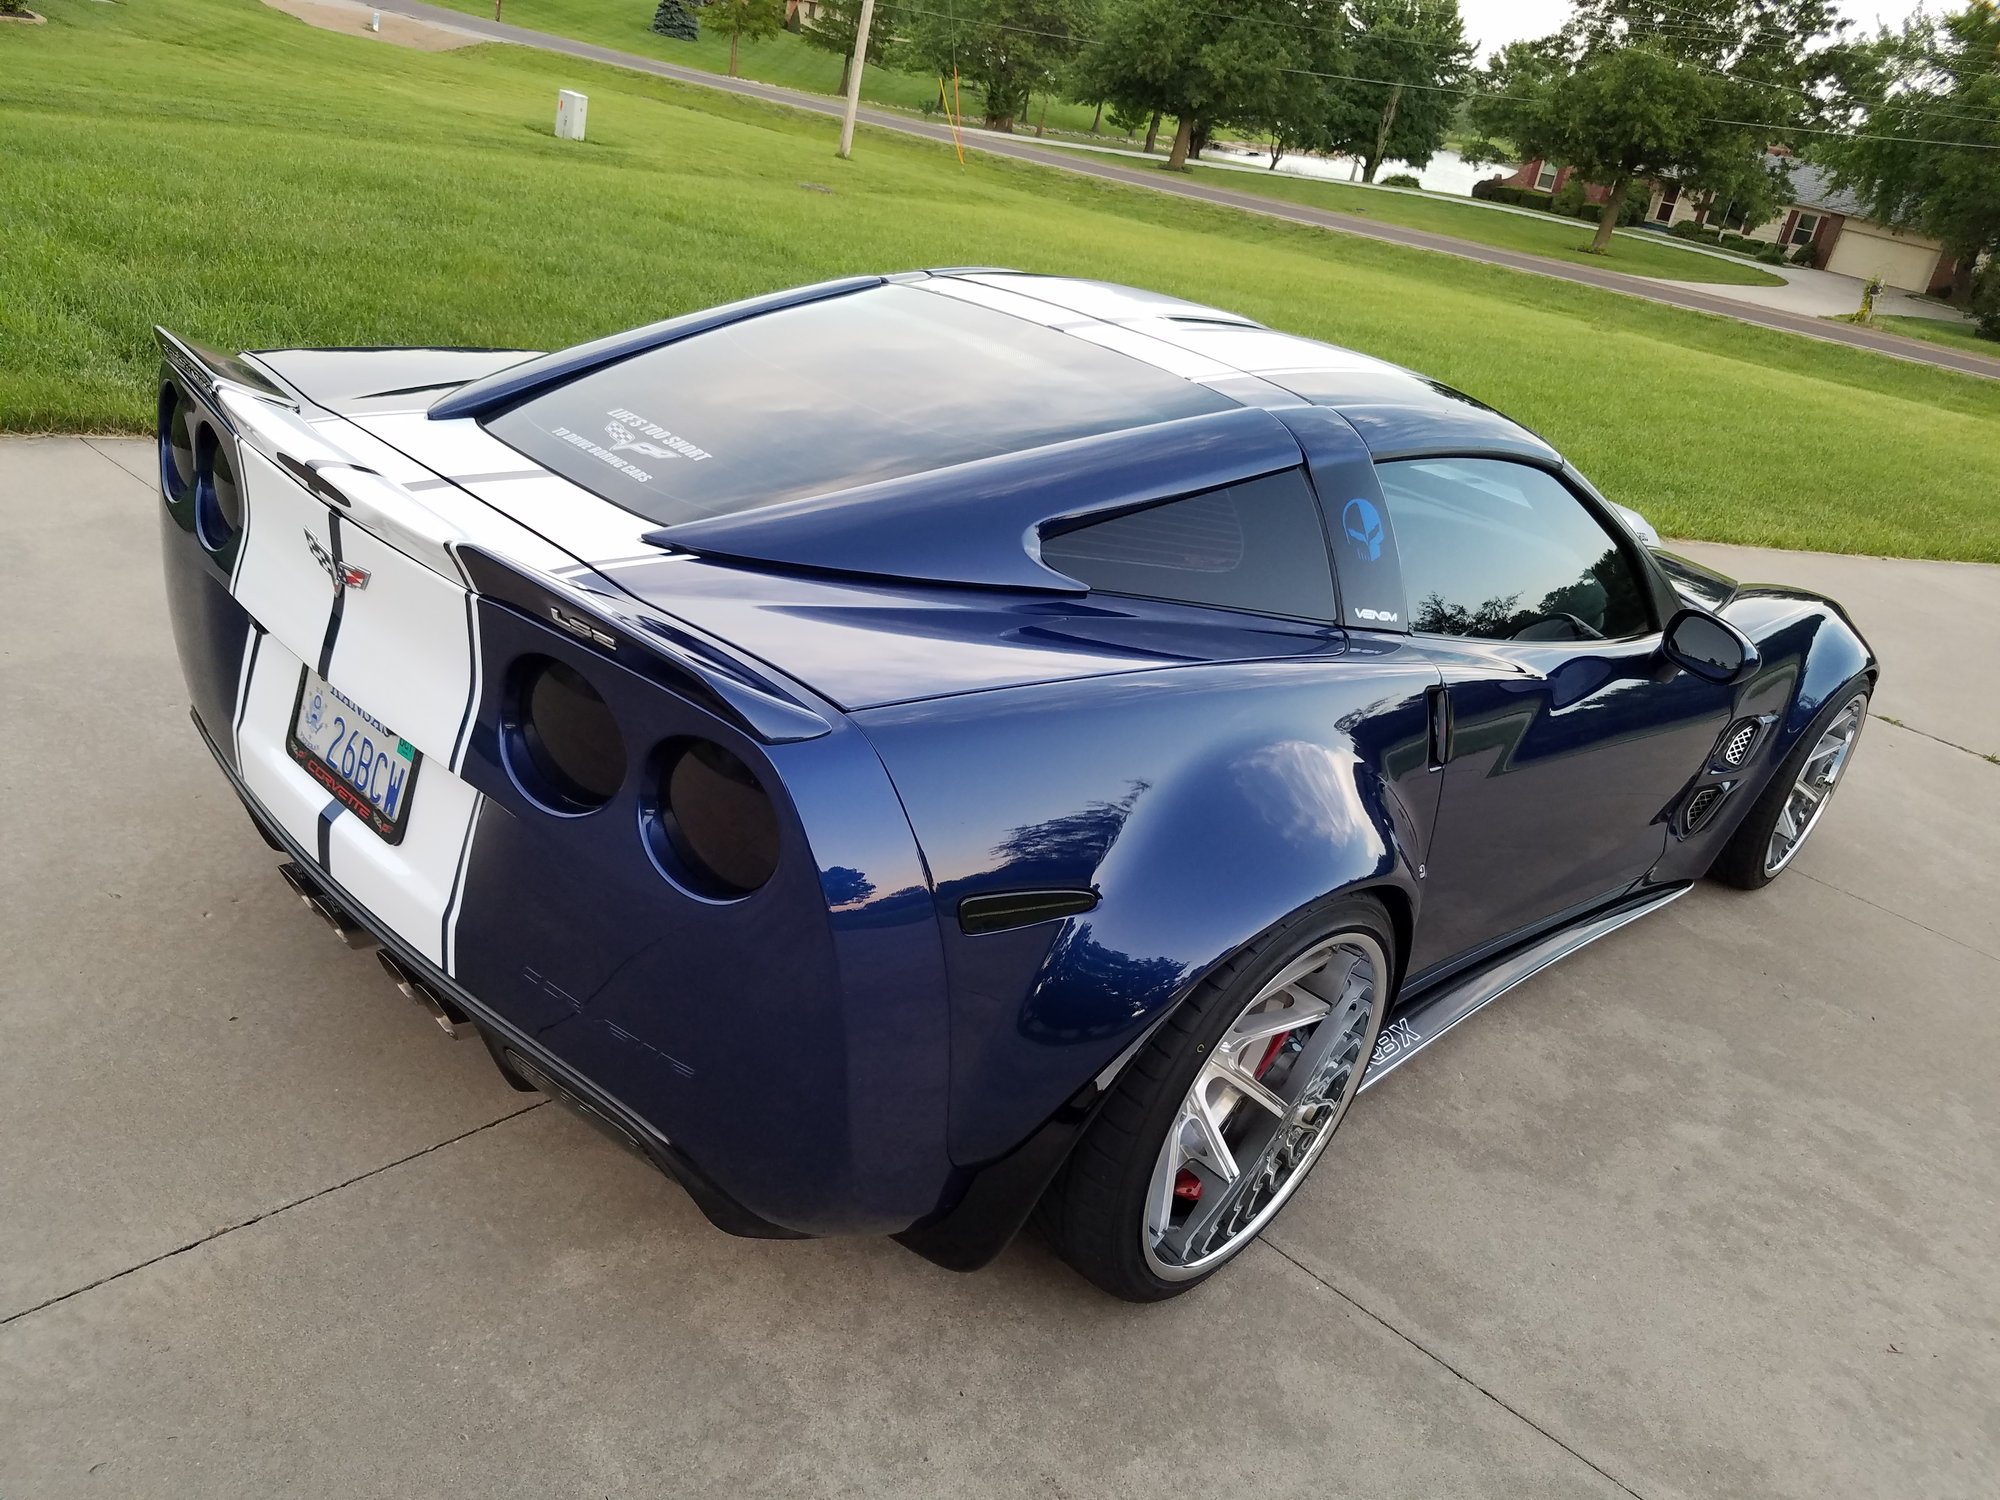 Corvette creationz specializes in bringing you the most unique and lowest c...